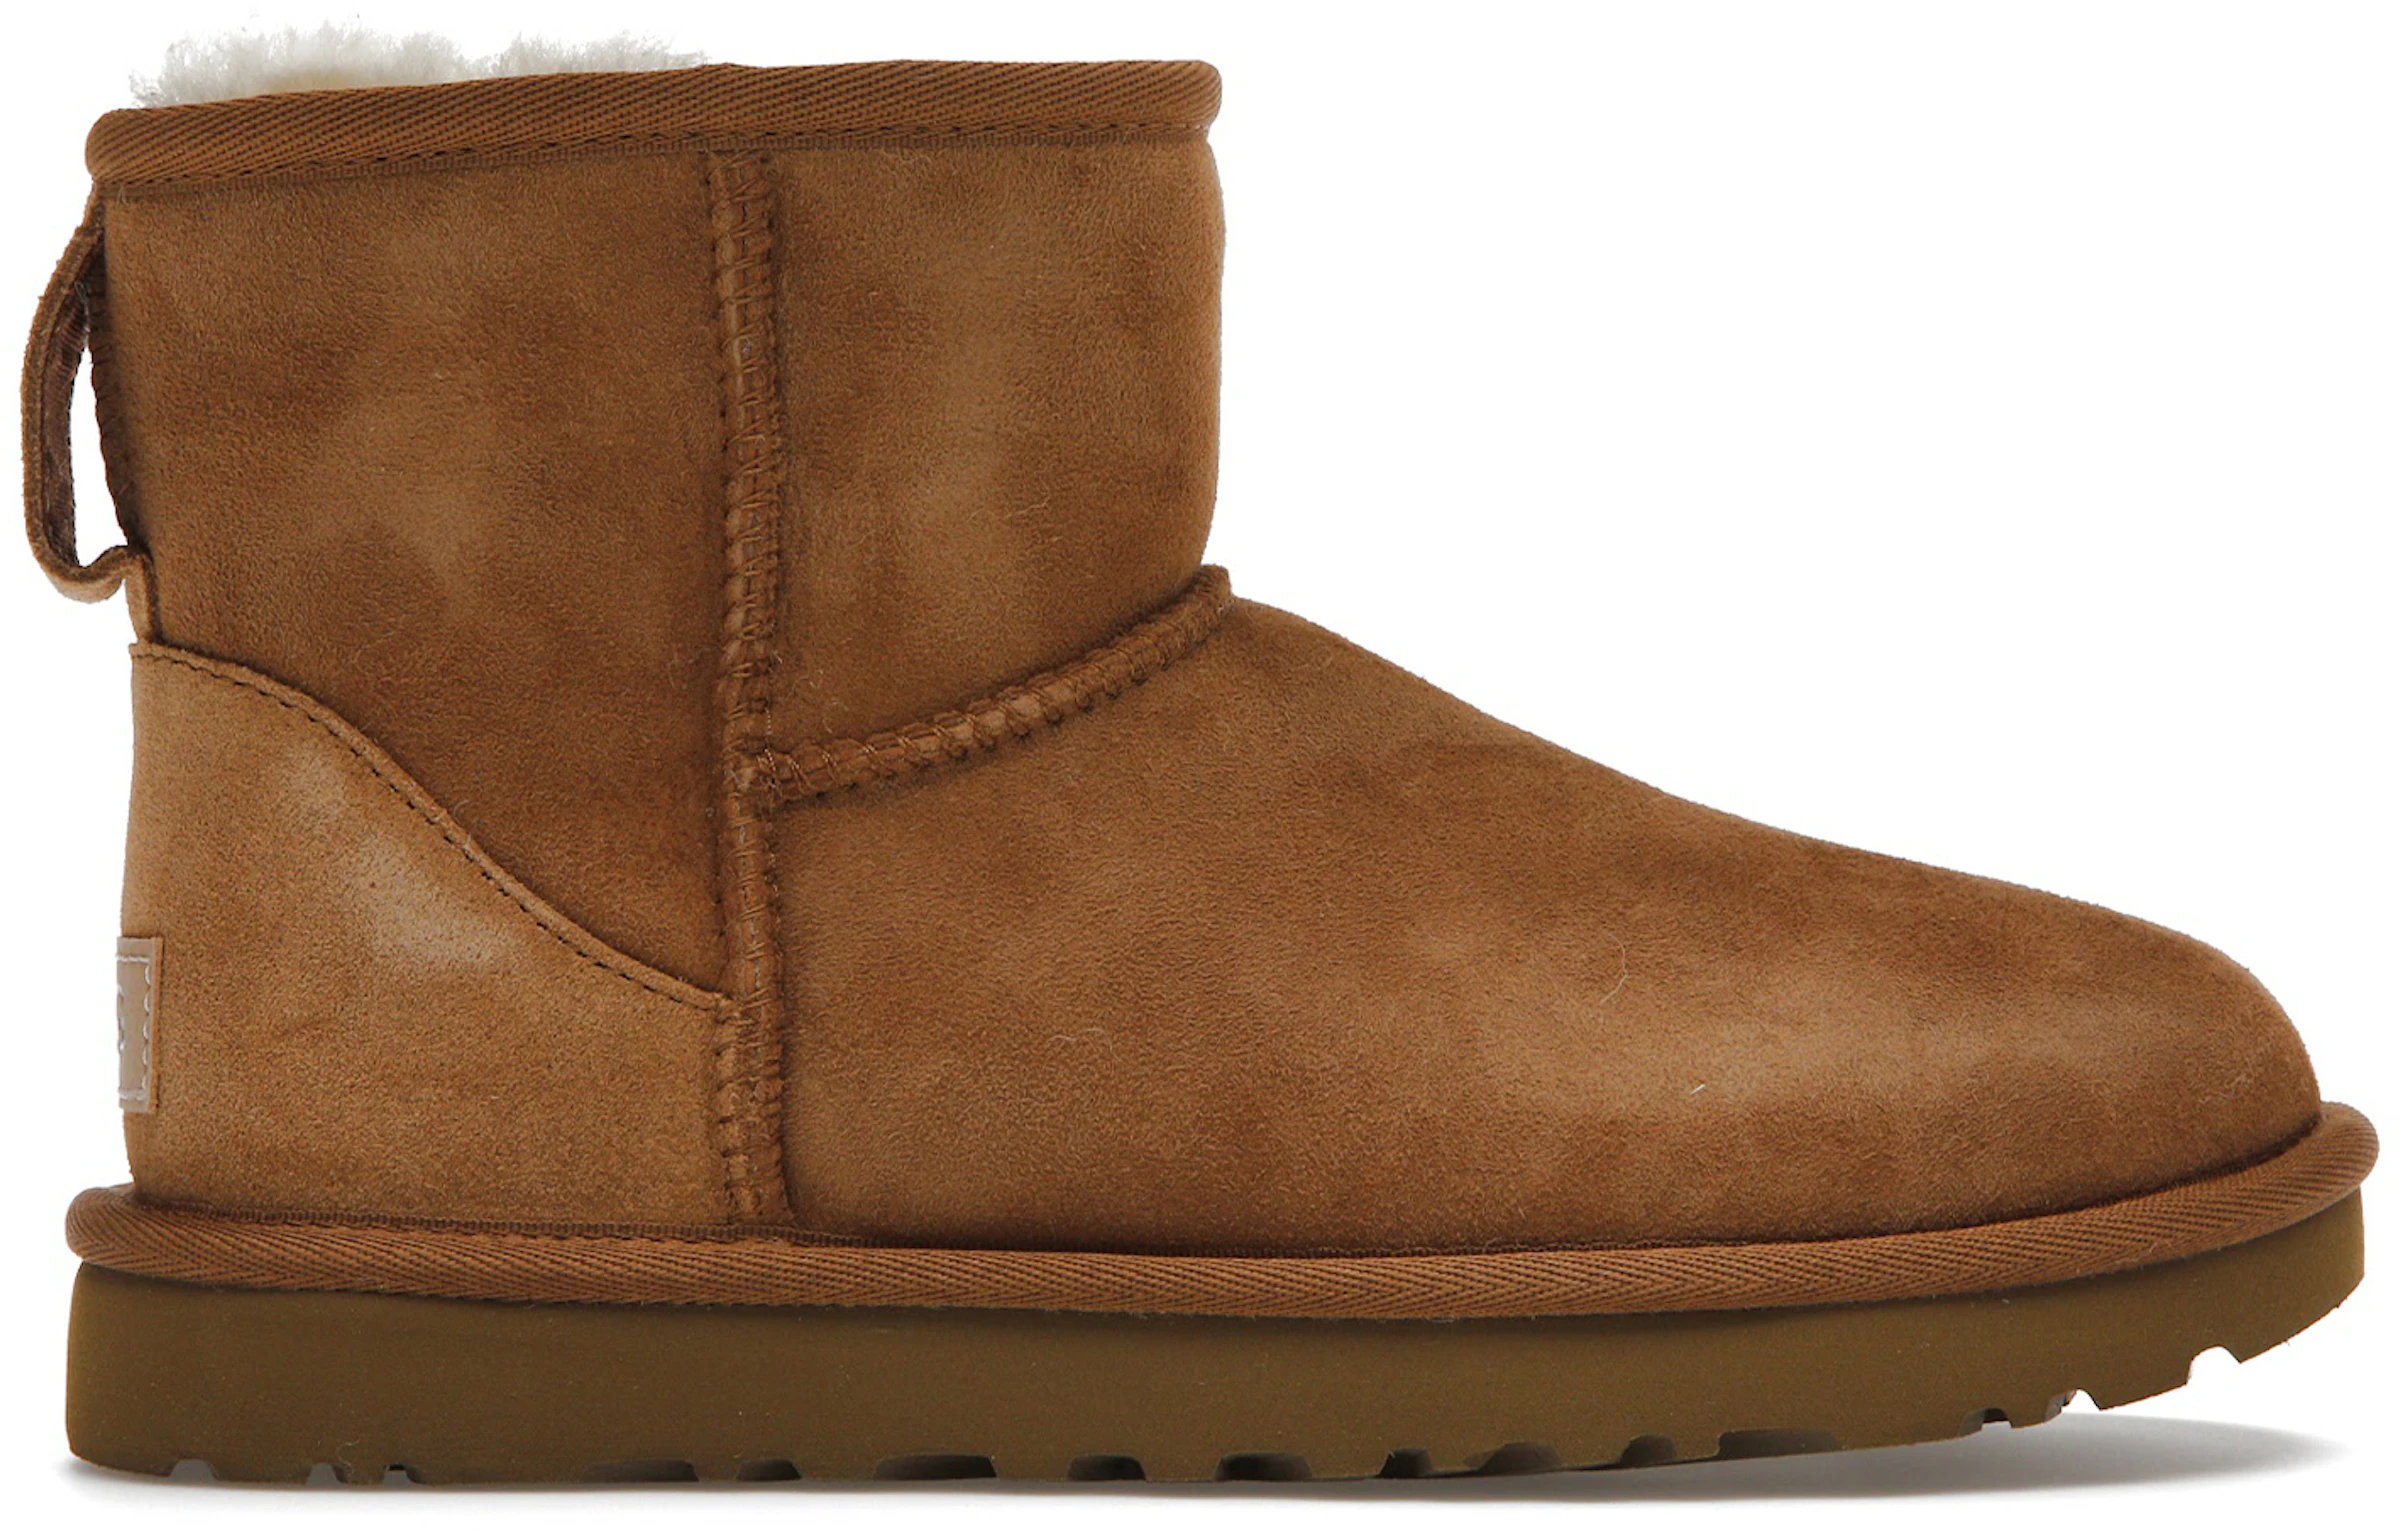 Buy UGG Shoes New Sneakers - StockX